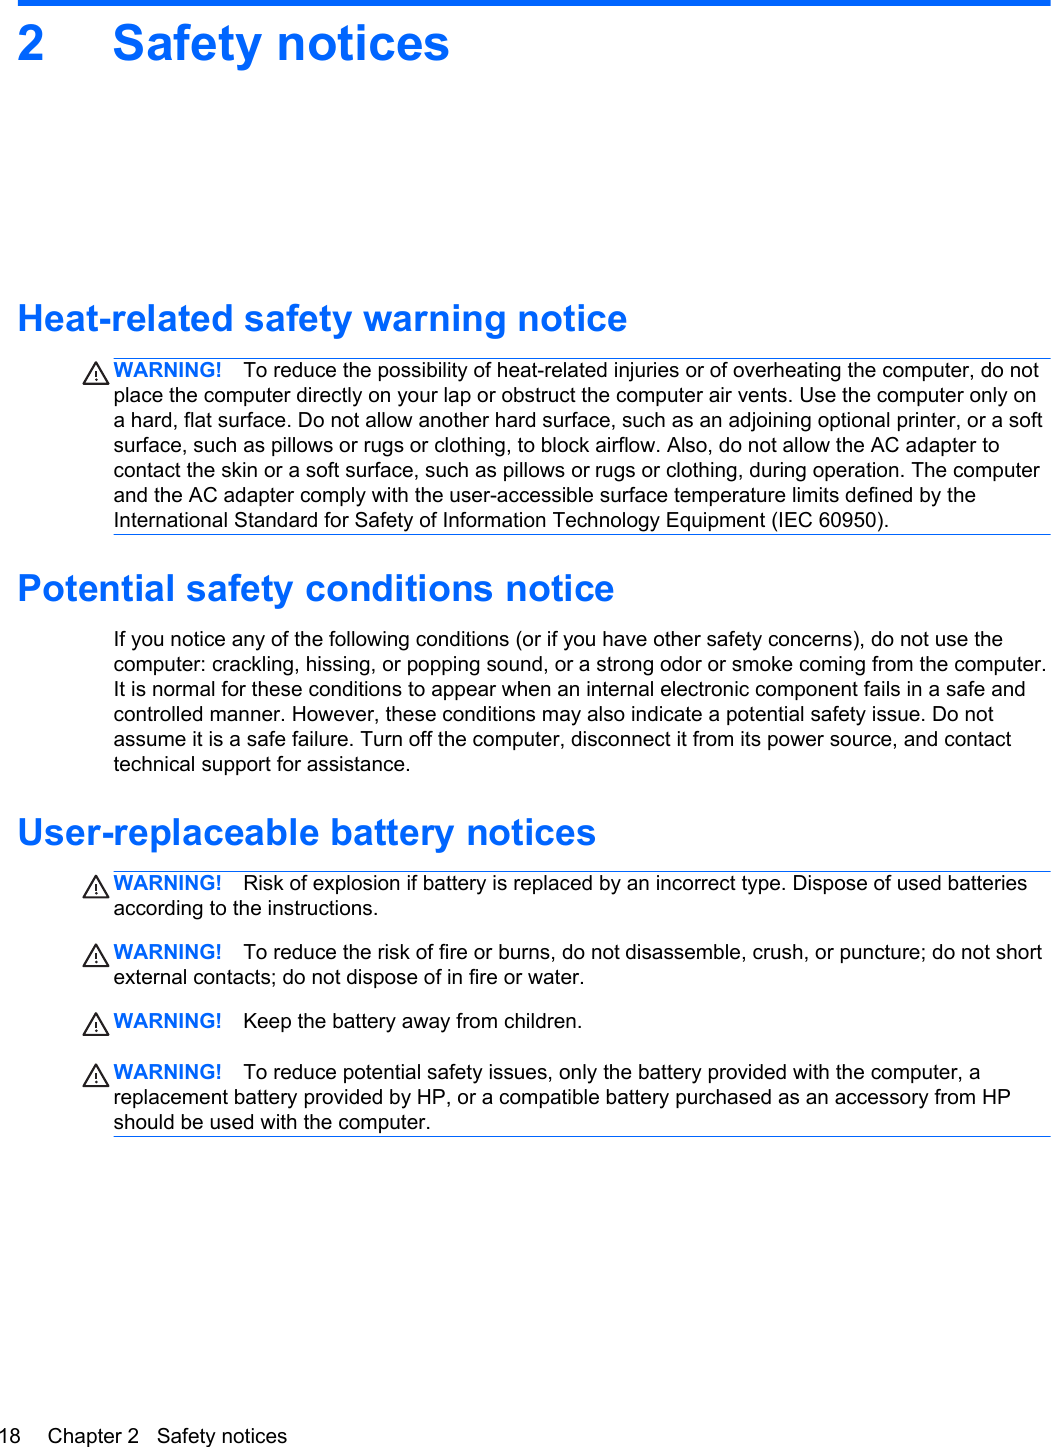 2 Safety noticesHeat-related safety warning noticeWARNING! To reduce the possibility of heat-related injuries or of overheating the computer, do notplace the computer directly on your lap or obstruct the computer air vents. Use the computer only ona hard, flat surface. Do not allow another hard surface, such as an adjoining optional printer, or a softsurface, such as pillows or rugs or clothing, to block airflow. Also, do not allow the AC adapter tocontact the skin or a soft surface, such as pillows or rugs or clothing, during operation. The computerand the AC adapter comply with the user-accessible surface temperature limits defined by theInternational Standard for Safety of Information Technology Equipment (IEC 60950).Potential safety conditions noticeIf you notice any of the following conditions (or if you have other safety concerns), do not use thecomputer: crackling, hissing, or popping sound, or a strong odor or smoke coming from the computer.It is normal for these conditions to appear when an internal electronic component fails in a safe andcontrolled manner. However, these conditions may also indicate a potential safety issue. Do notassume it is a safe failure. Turn off the computer, disconnect it from its power source, and contacttechnical support for assistance.User-replaceable battery noticesWARNING! Risk of explosion if battery is replaced by an incorrect type. Dispose of used batteriesaccording to the instructions.WARNING! To reduce the risk of fire or burns, do not disassemble, crush, or puncture; do not shortexternal contacts; do not dispose of in fire or water.WARNING! Keep the battery away from children.WARNING! To reduce potential safety issues, only the battery provided with the computer, areplacement battery provided by HP, or a compatible battery purchased as an accessory from HPshould be used with the computer.18 Chapter 2   Safety notices